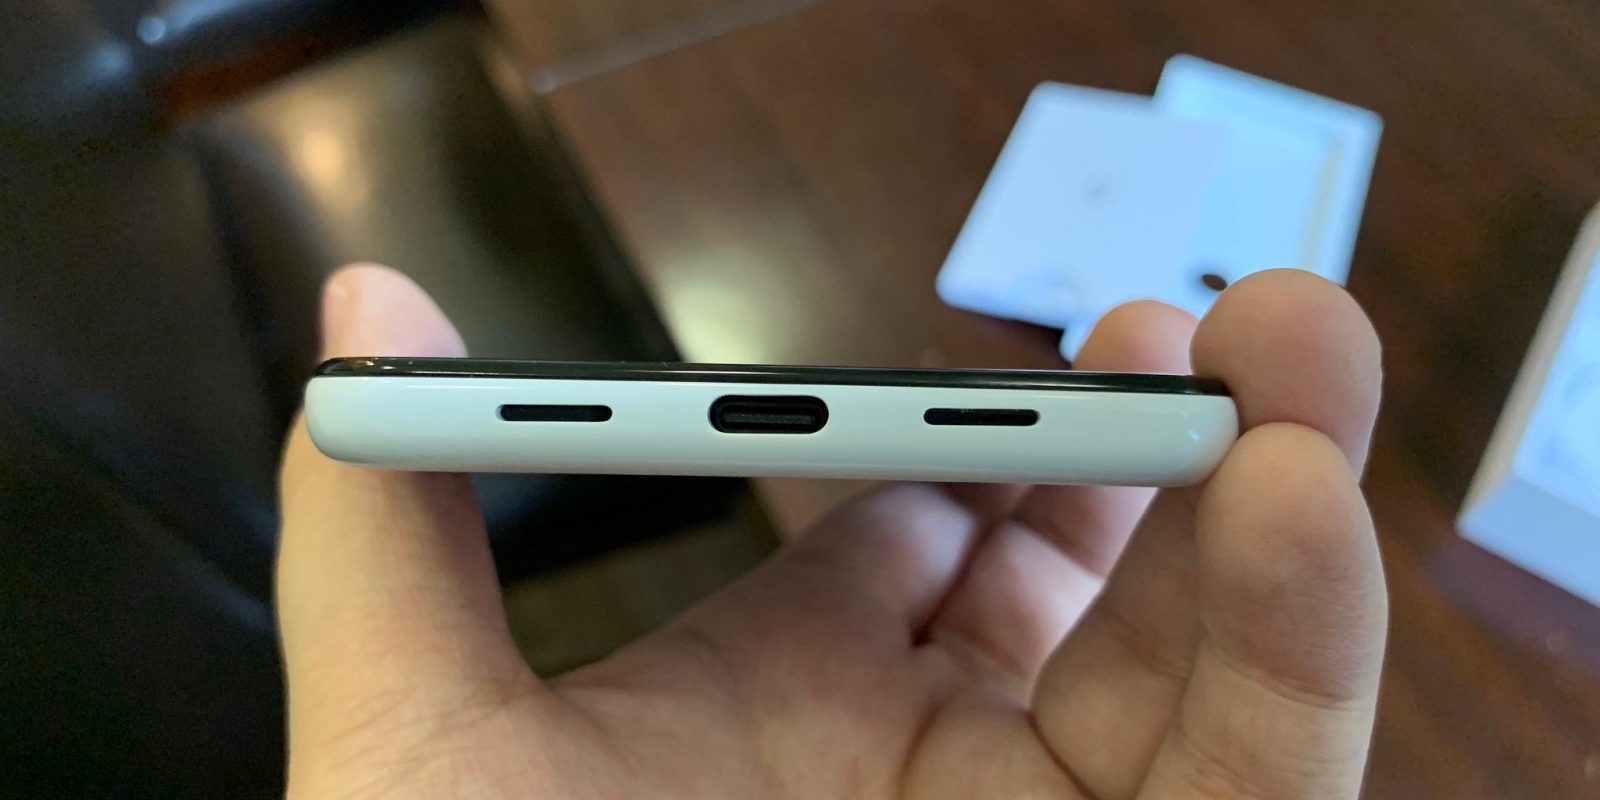 Some Google Pixel 3a owners encountering crooked USB-C, speaker cutouts - 9to5Google thumbnail